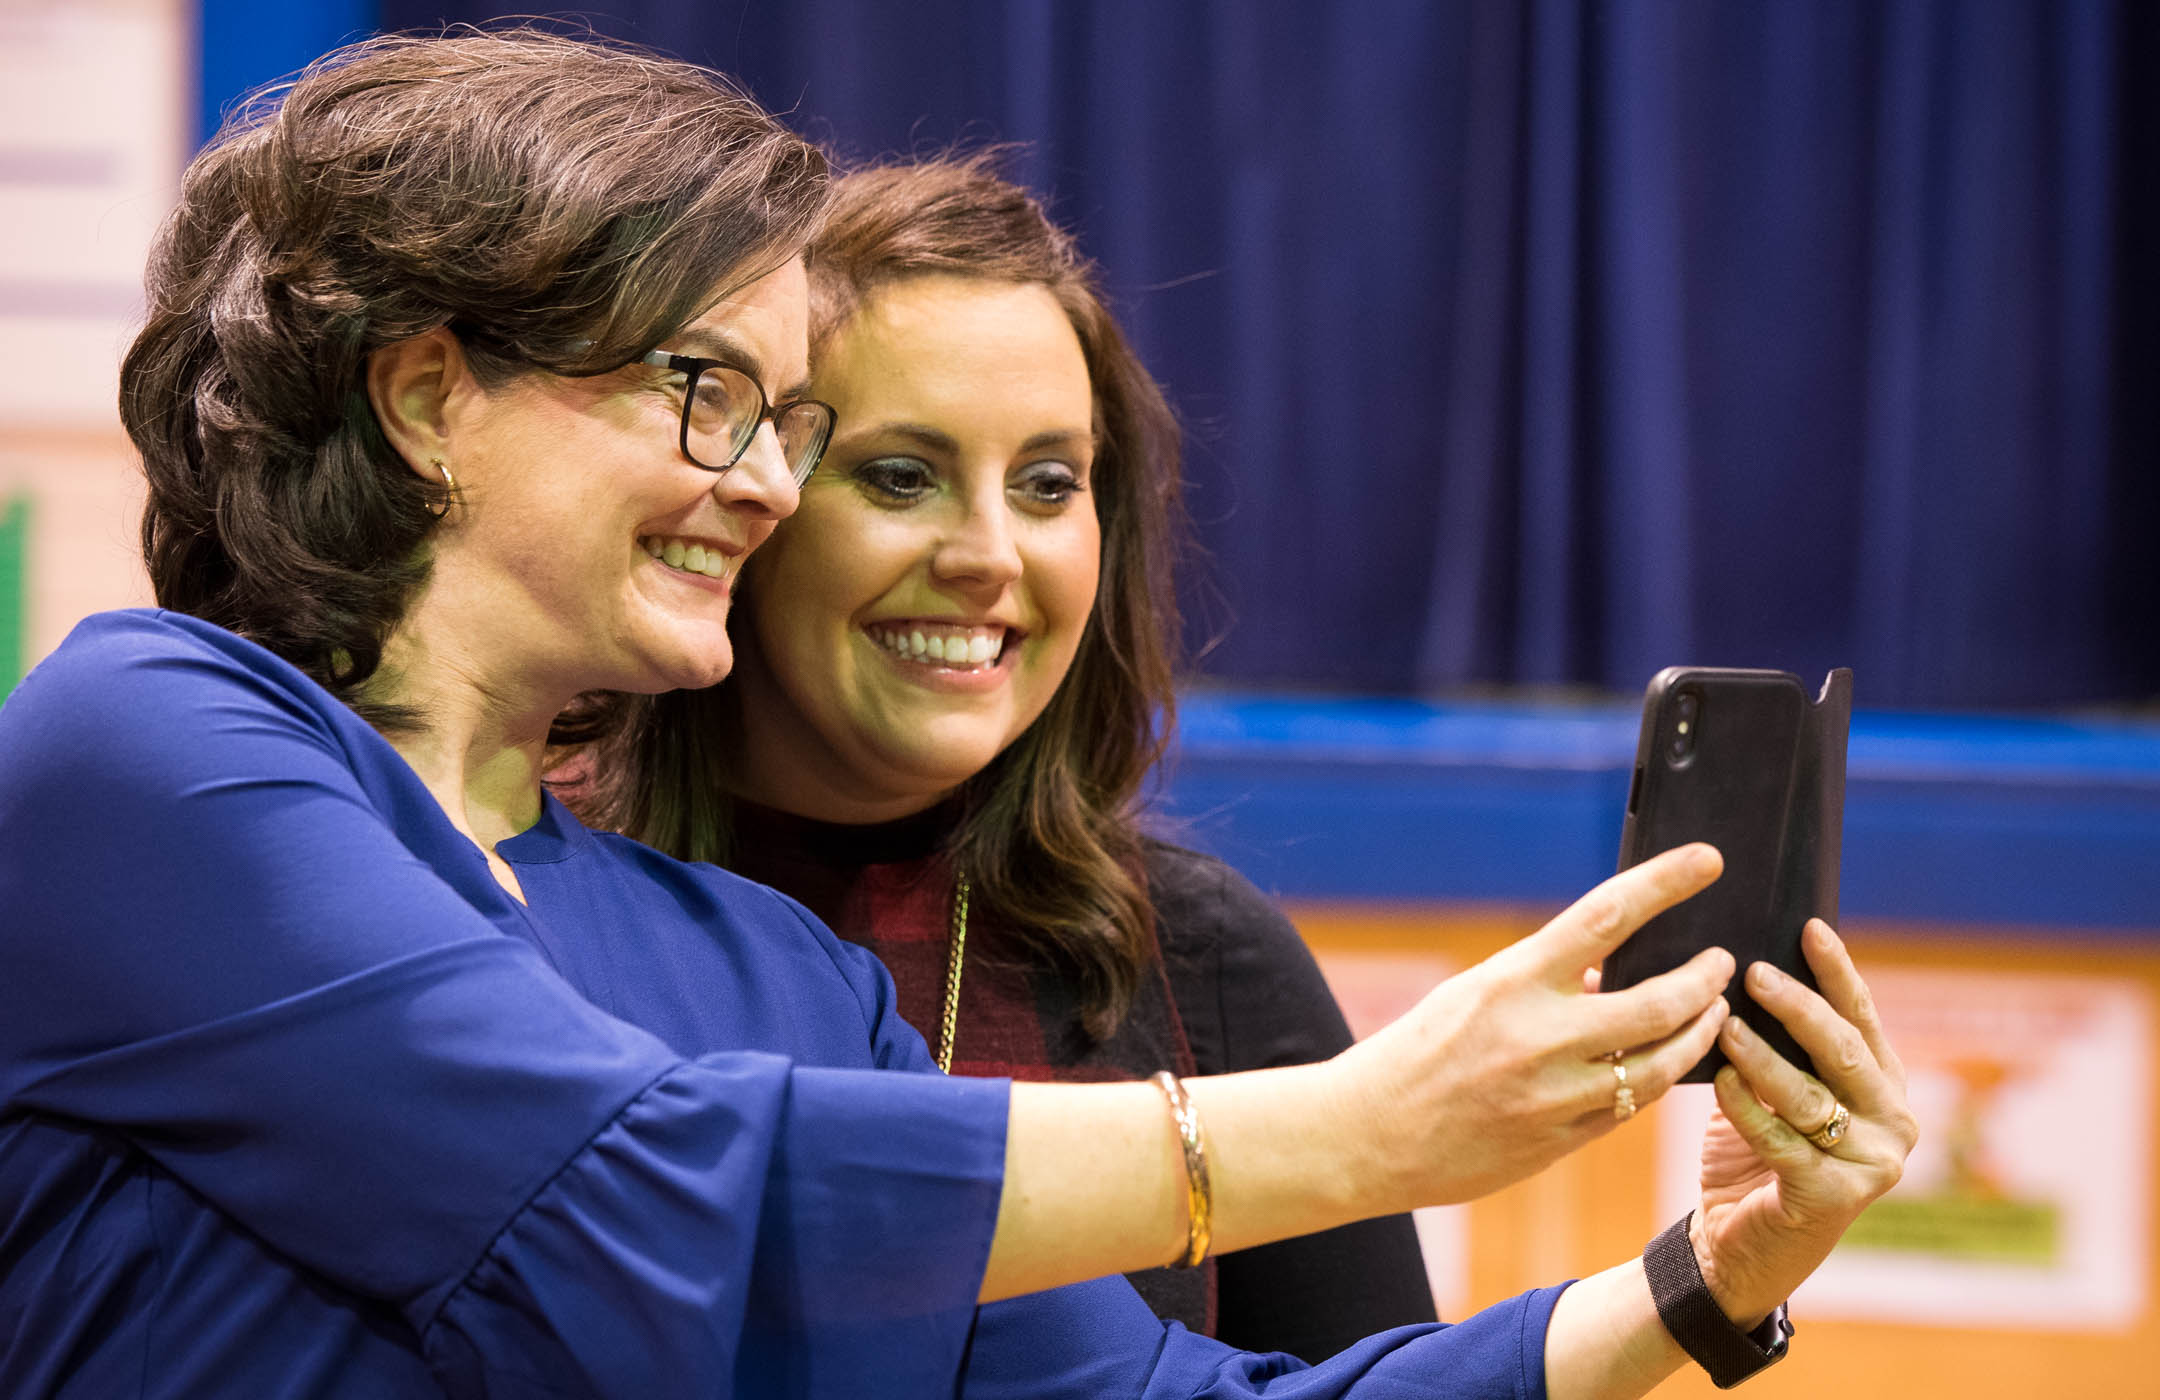 Brooke Powers, right, a 7th-grade mathematics teacher at Beaumont Elementary School (Fayette County) who was named a Milken Education Award winner Jan. 9, poses for a selfie with former Milken award winner Greta Casto, the chief information officer at Russell Independent schools, following the announcement of Powers' award. Powers is one of 44 Milken Educators who will be honored in 2017-18, and the only one in Kentucky. Photo by Bobby Ellis, Jan. 9, 2017